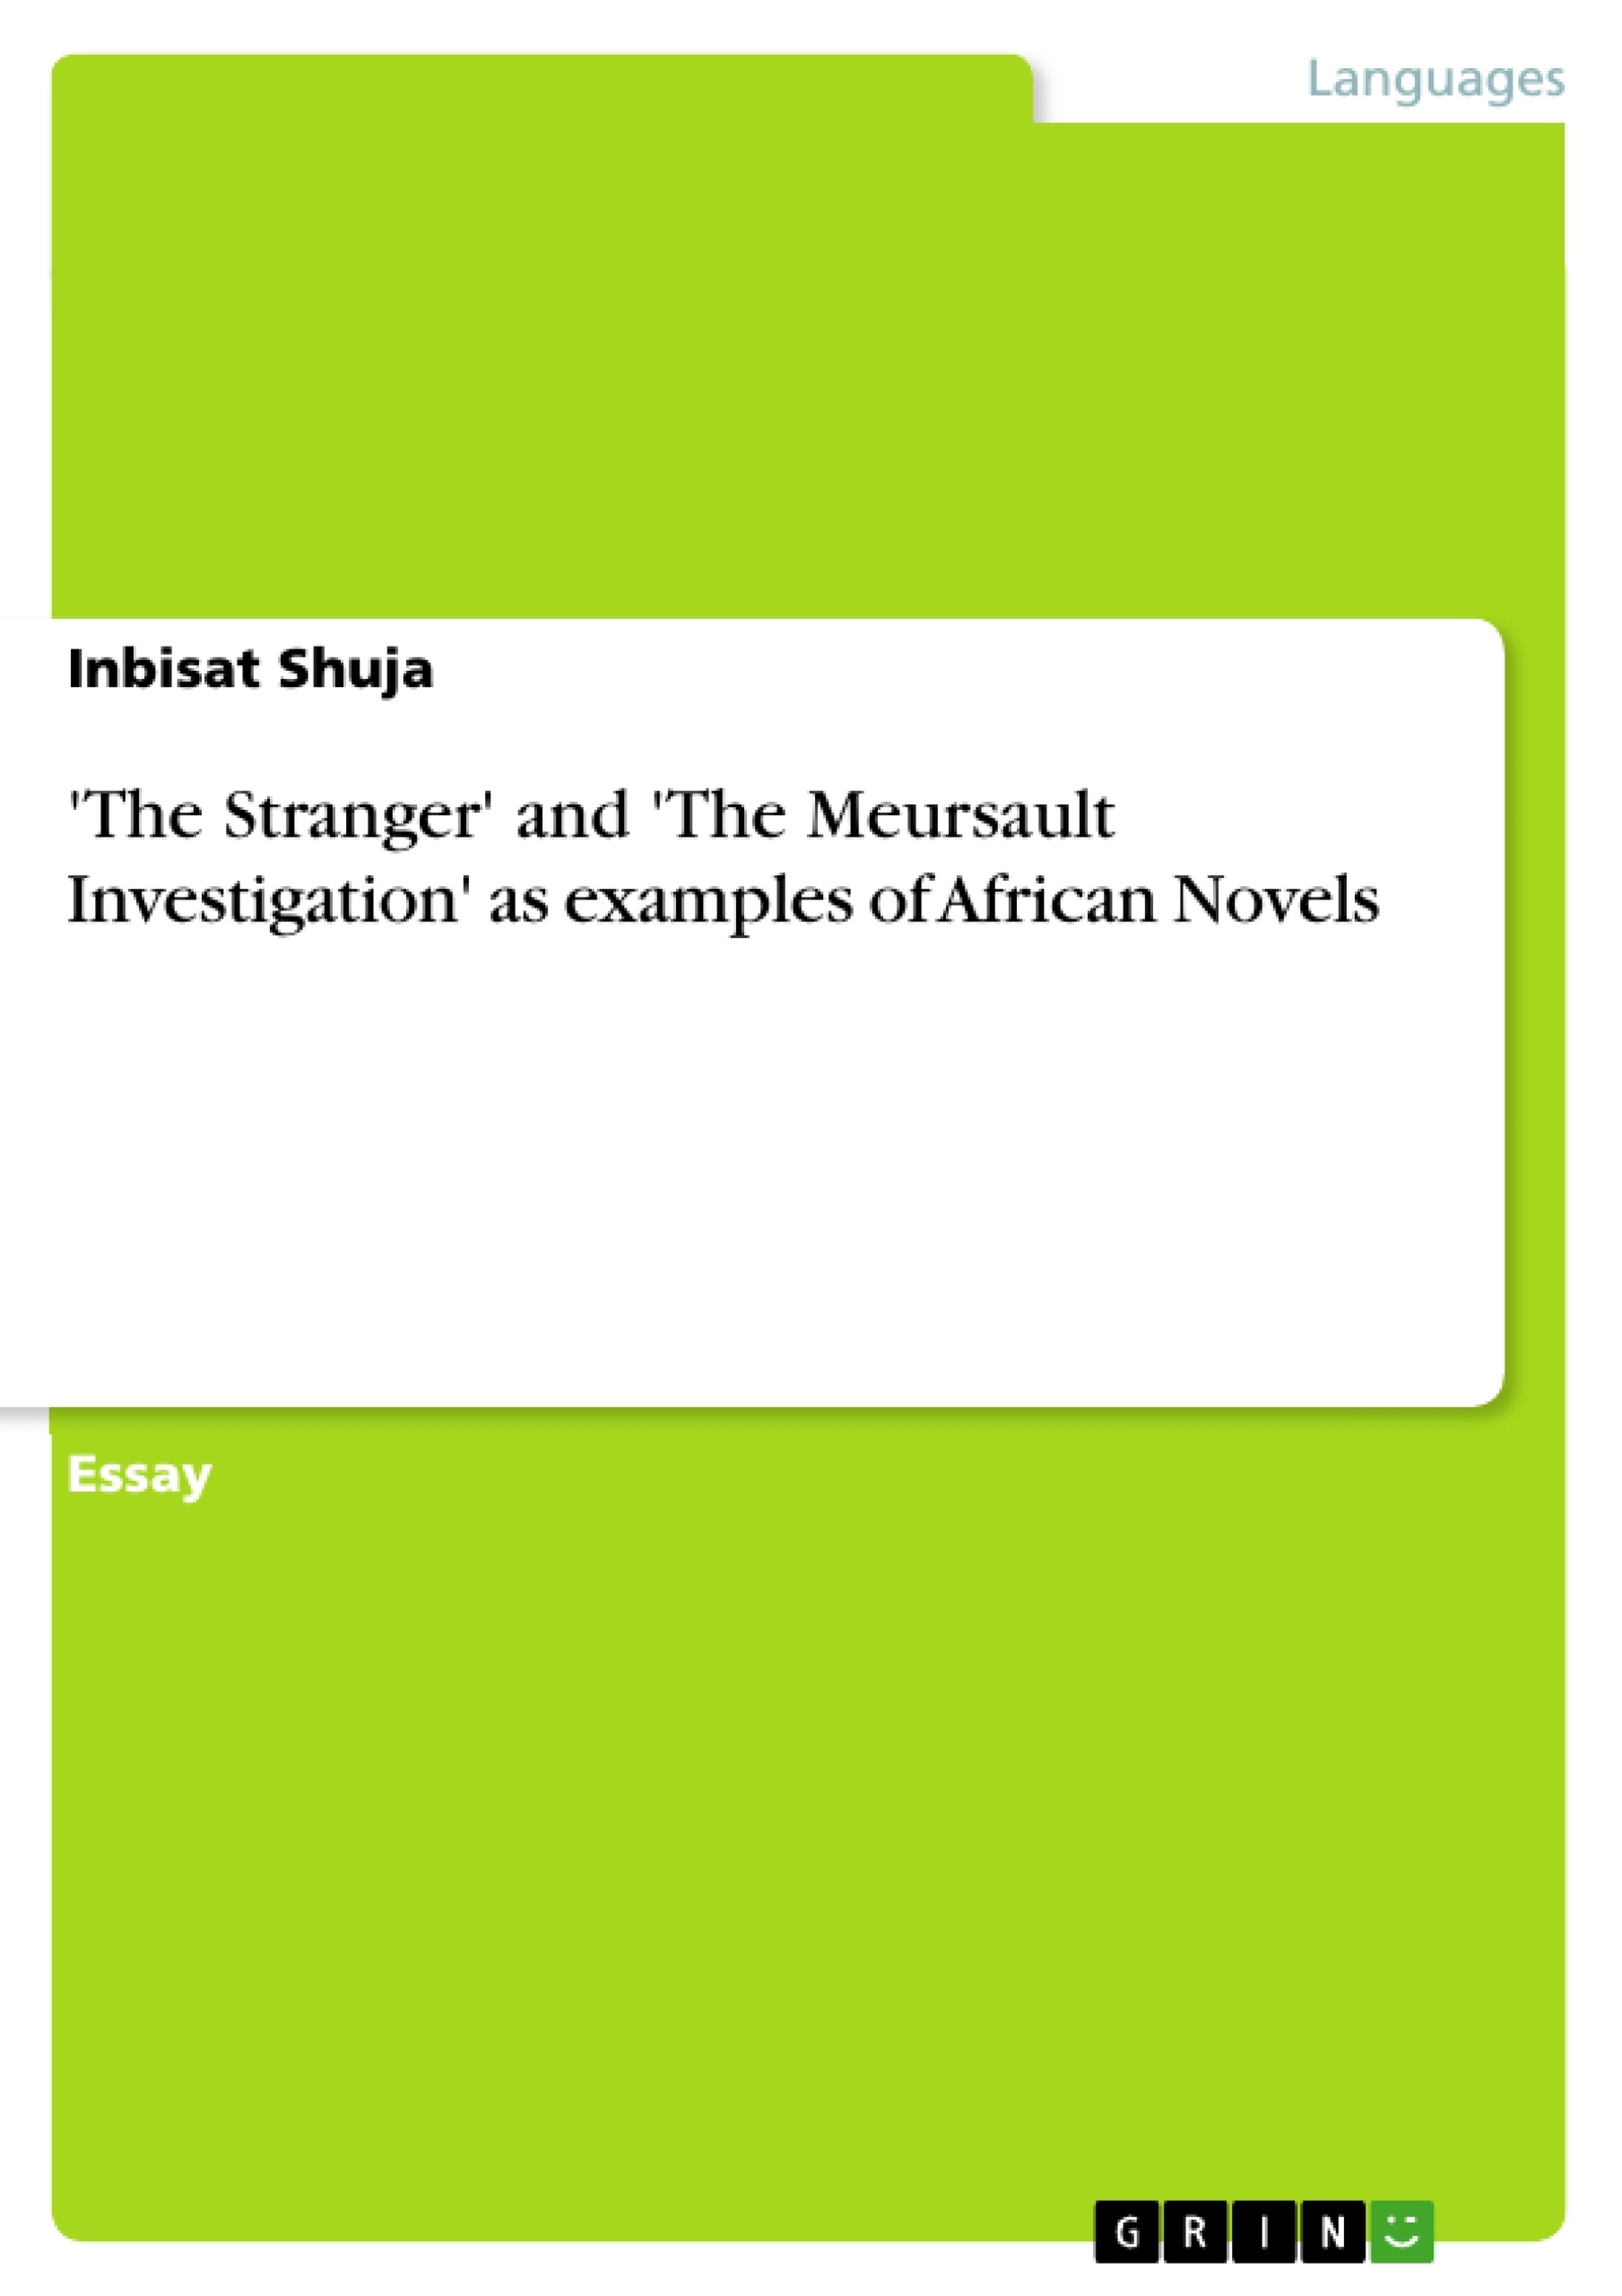 Título: 'The Stranger' and 'The Meursault Investigation' as examples of African Novels